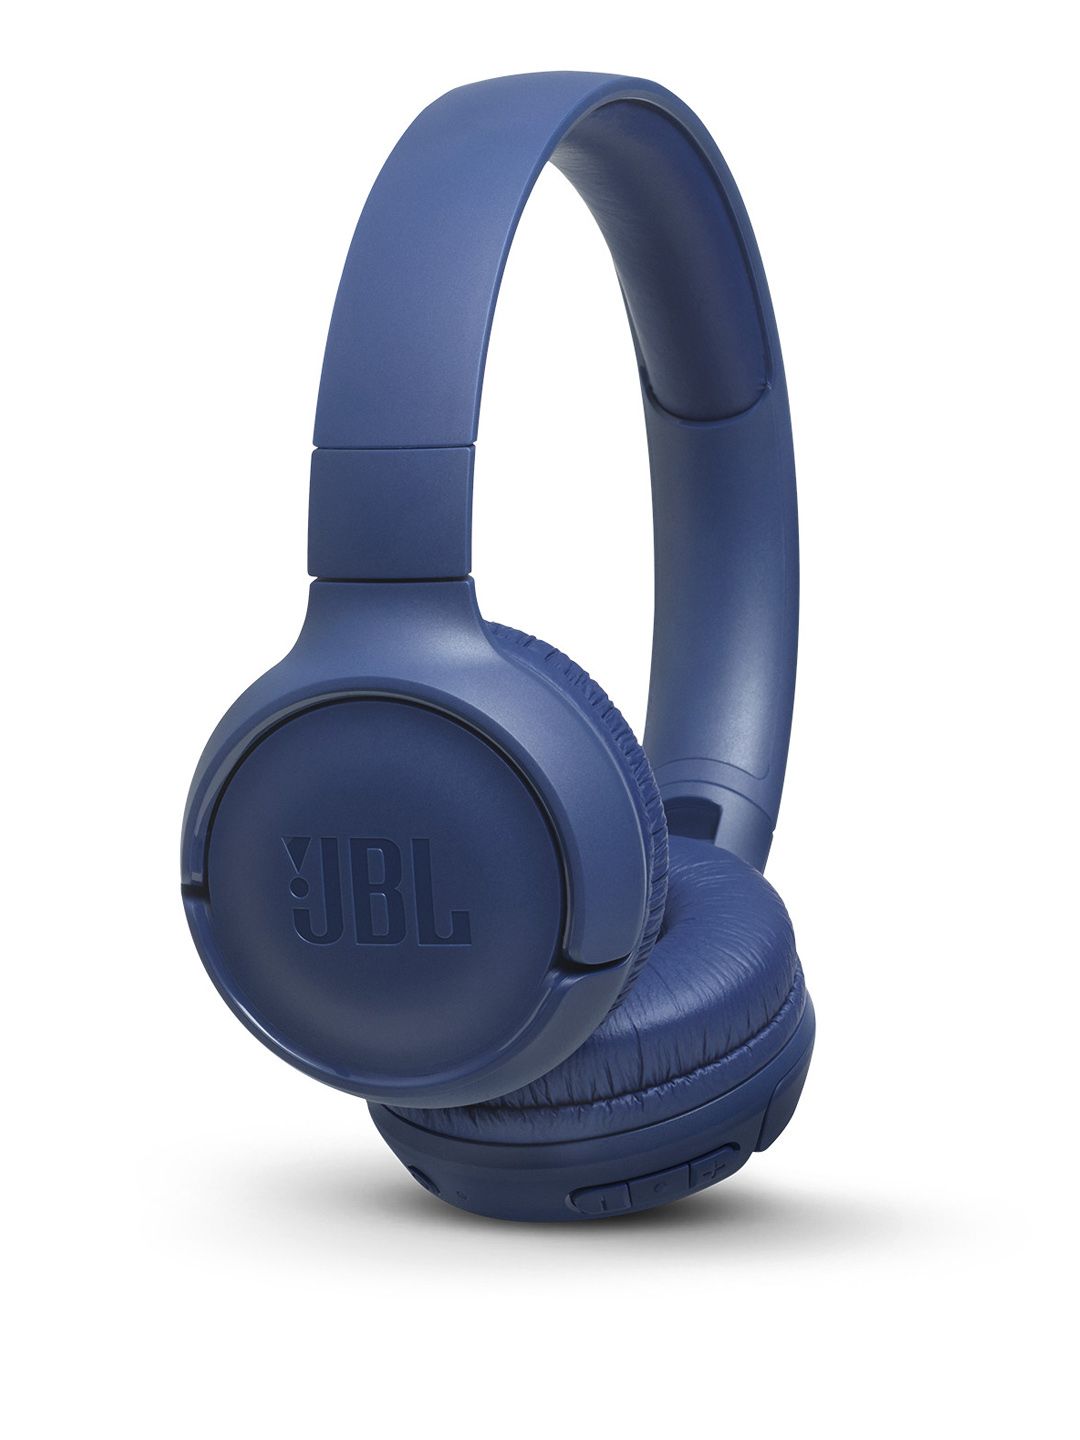 JBL Blue T500BT Powerful Bass Wireless Over Ear Headphones with Mic Price in India